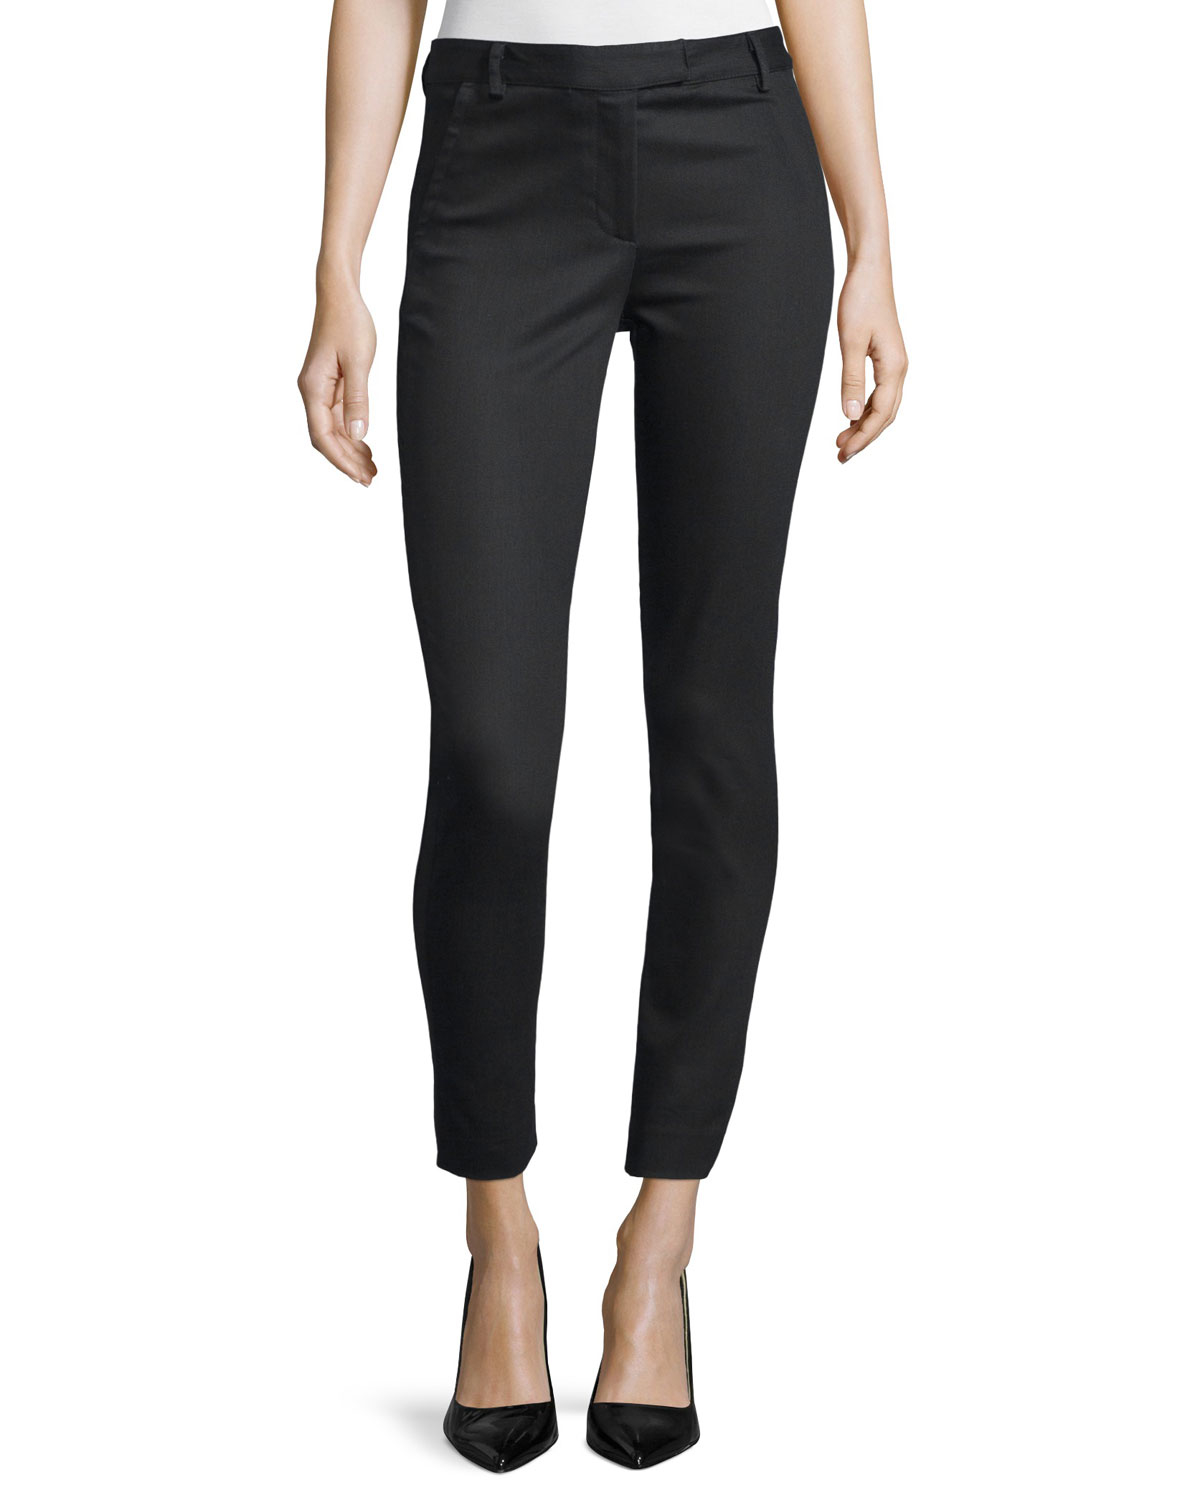 Lyst - Nicole Miller Leather-front Skinny Ankle Pants in Black